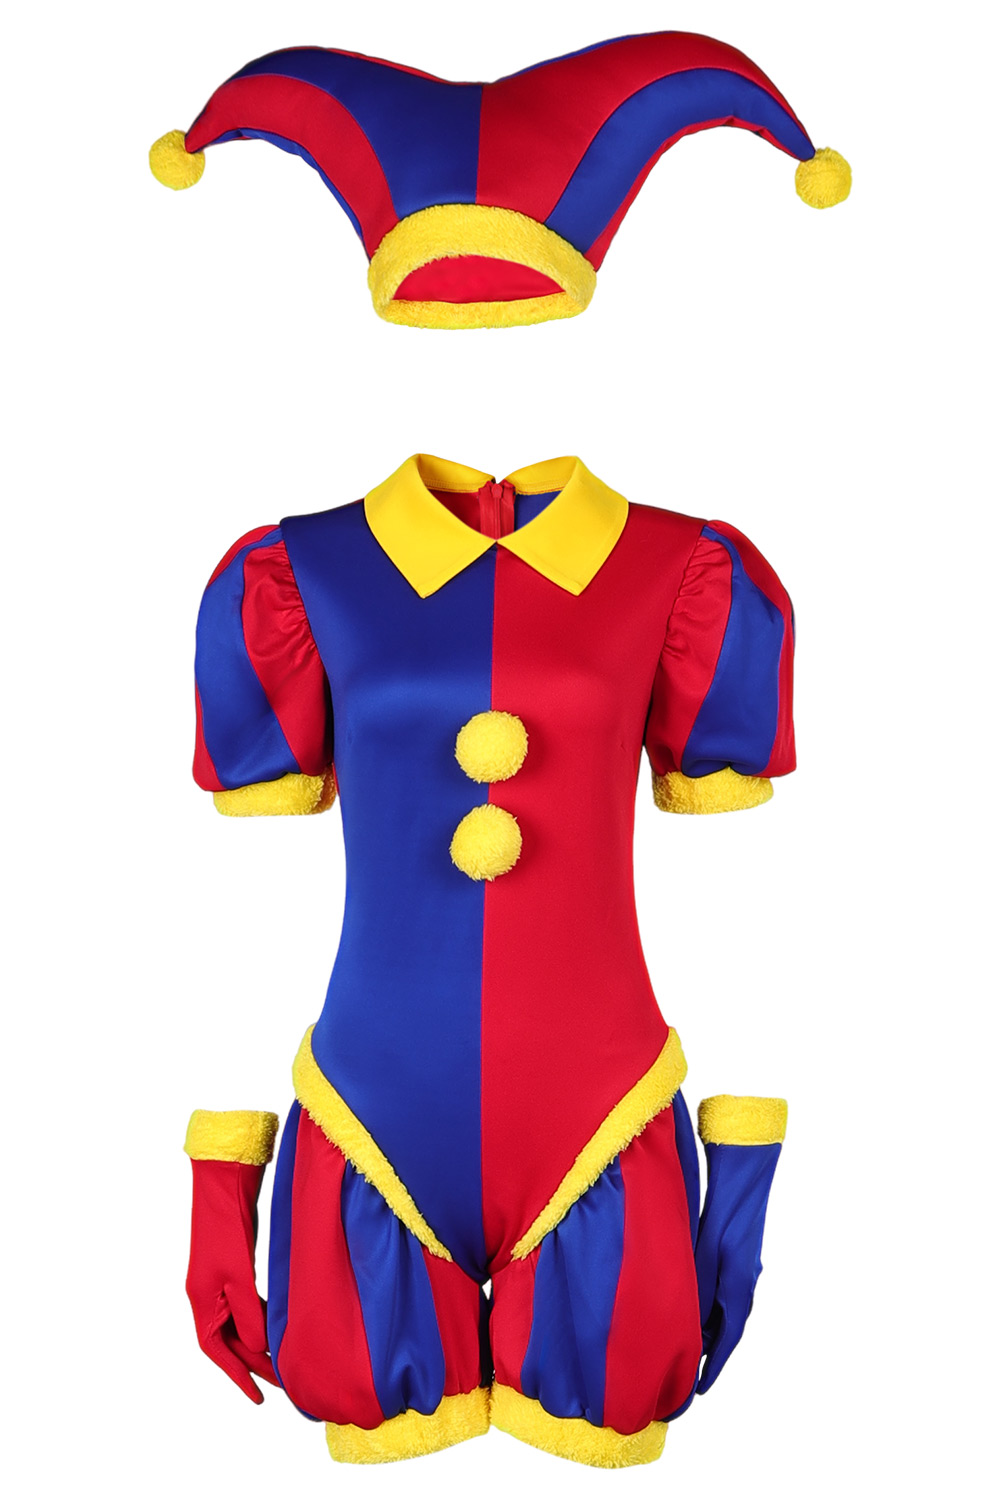 TV The Amazing Digital Circus Pomni Outfits Halloween Suit Cosplay Costume